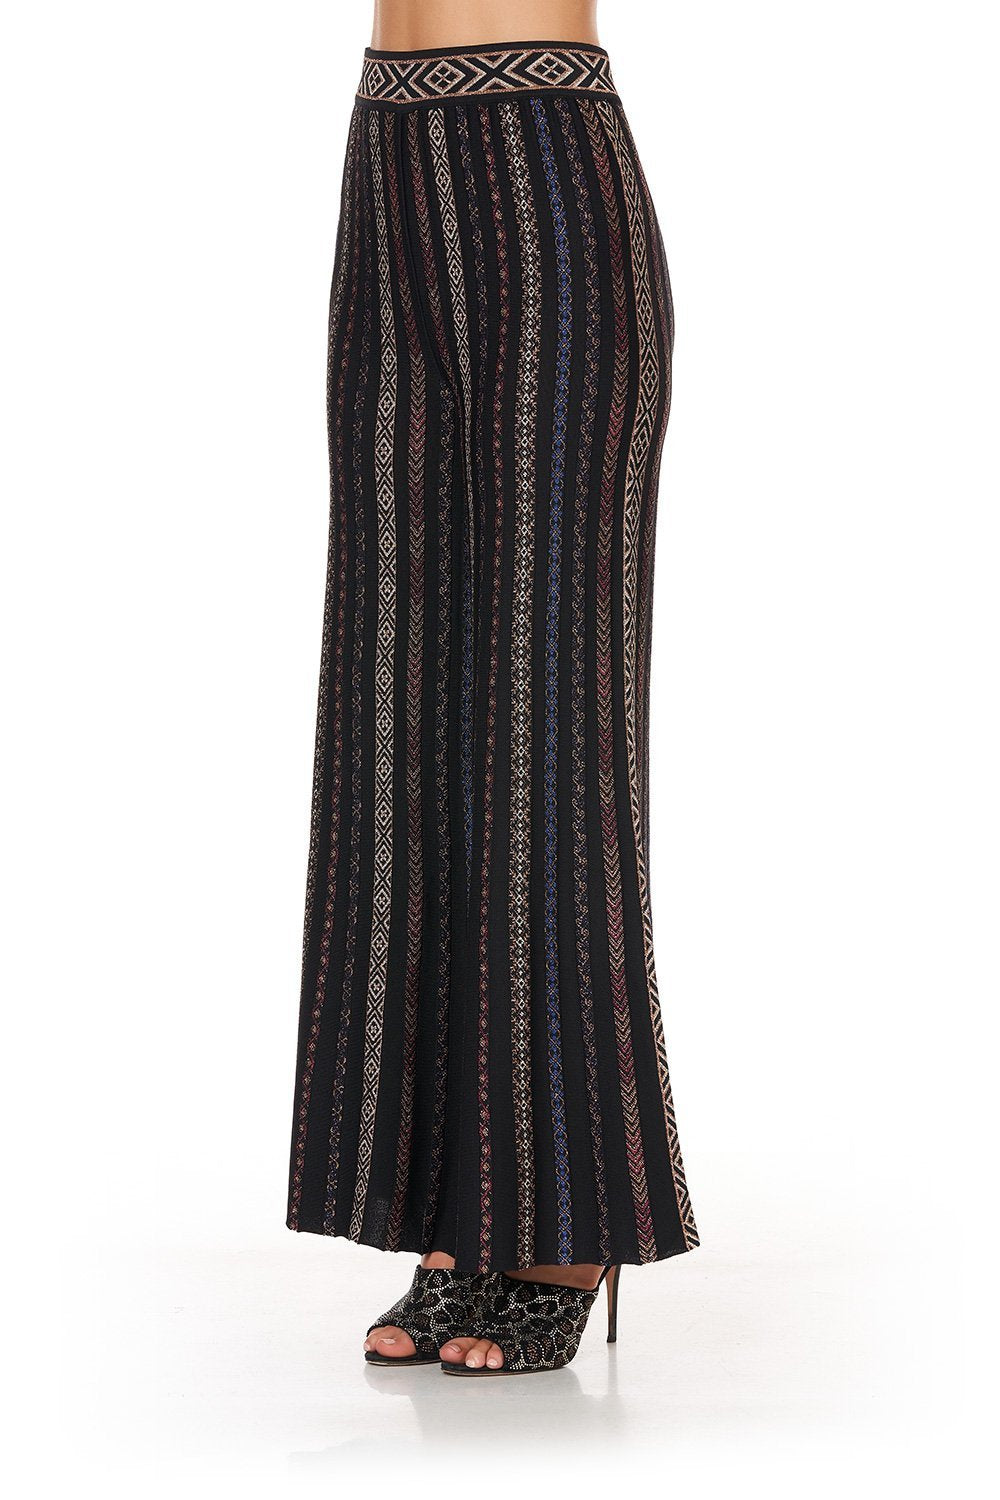 FIT AND FLARE KNIT PANTS SWINGING SIXTIES